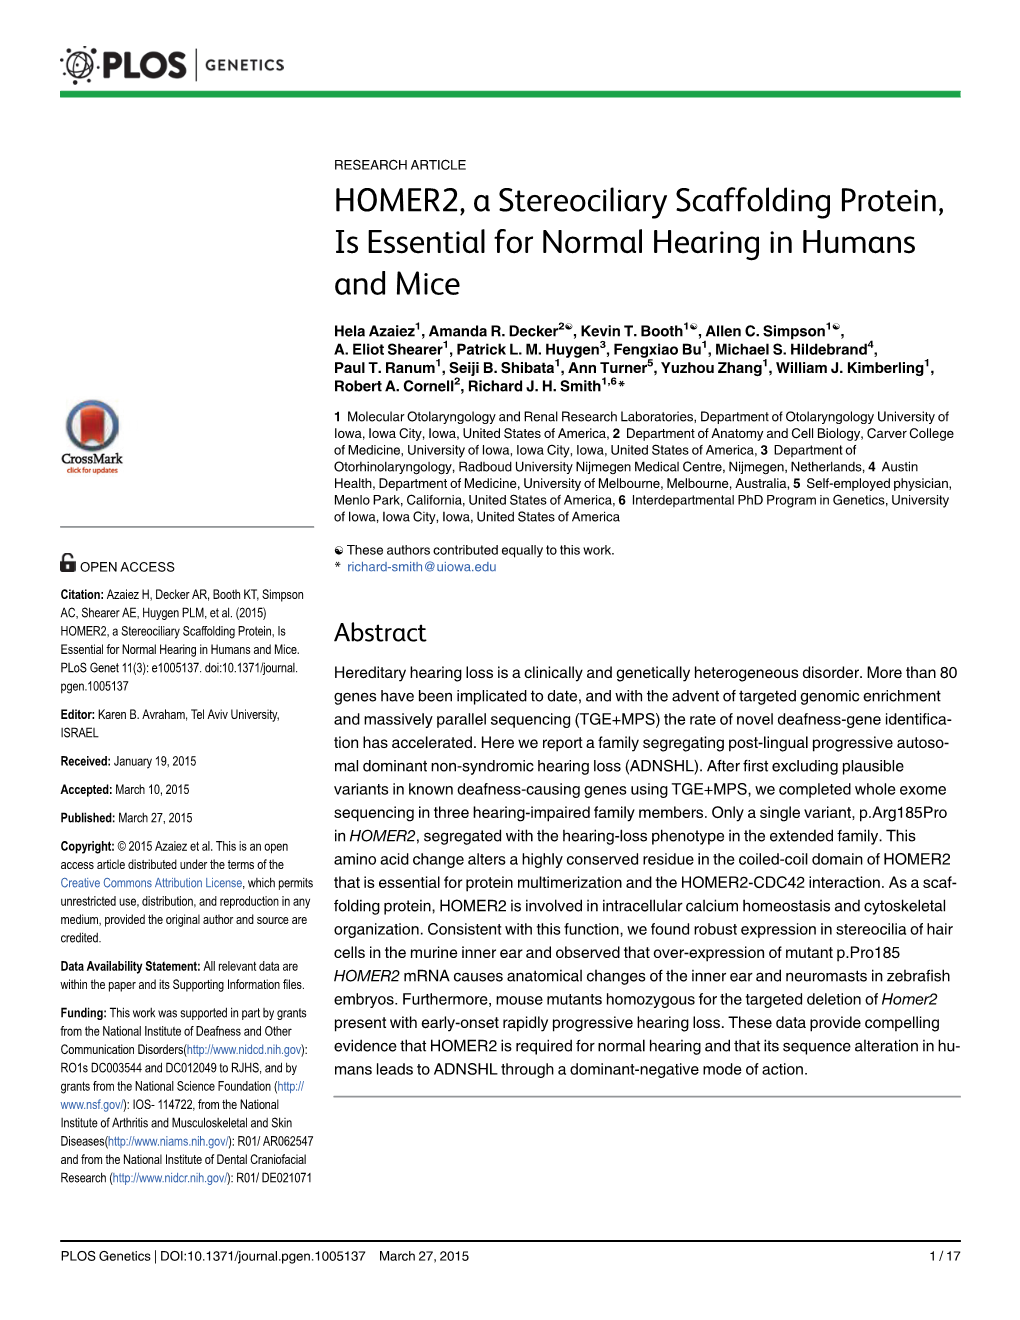 HOMER2, a Stereociliary Scaffolding Protein, Is Essential for Normal Hearing in Humans and Mice